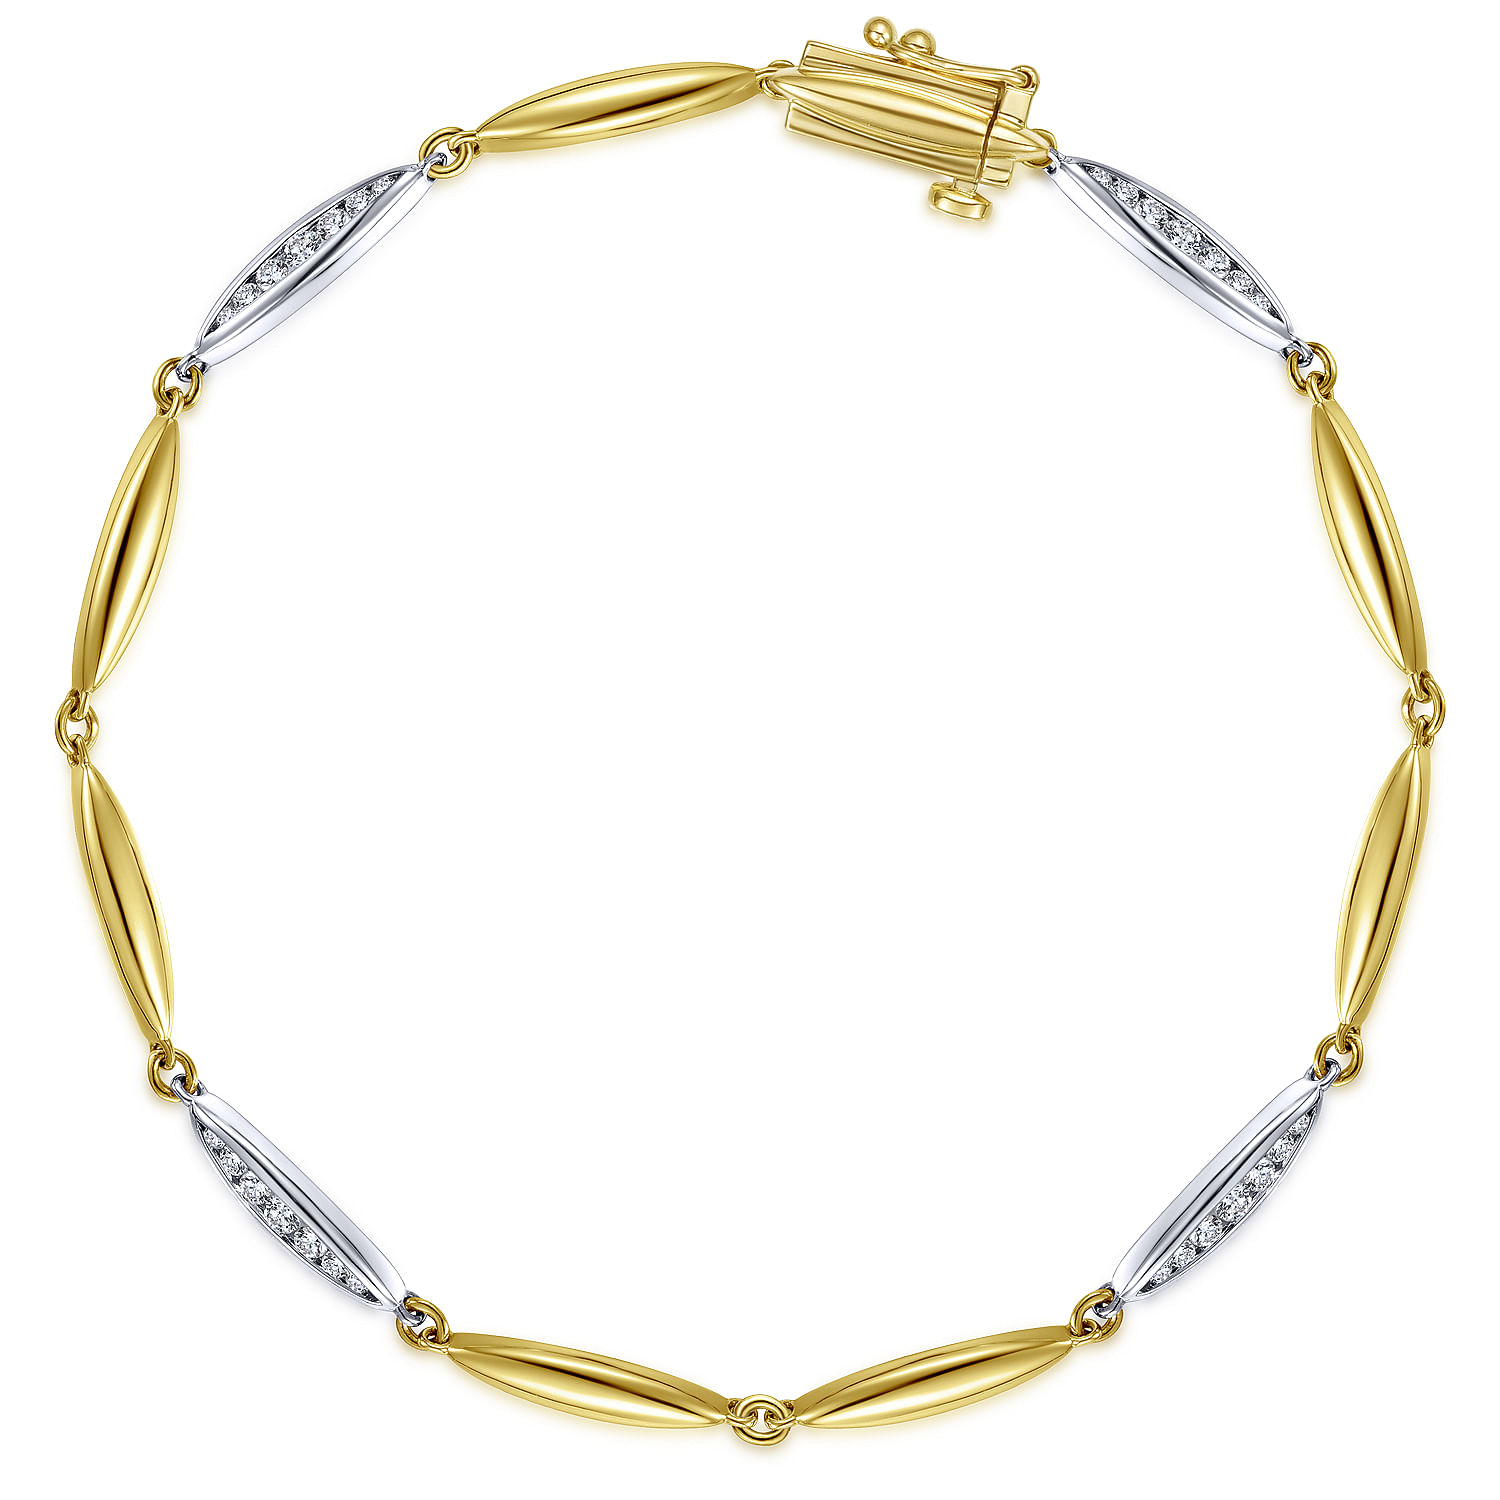 14K Yellow and White Gold Bracelet with Marquise Shapes and Diamonds